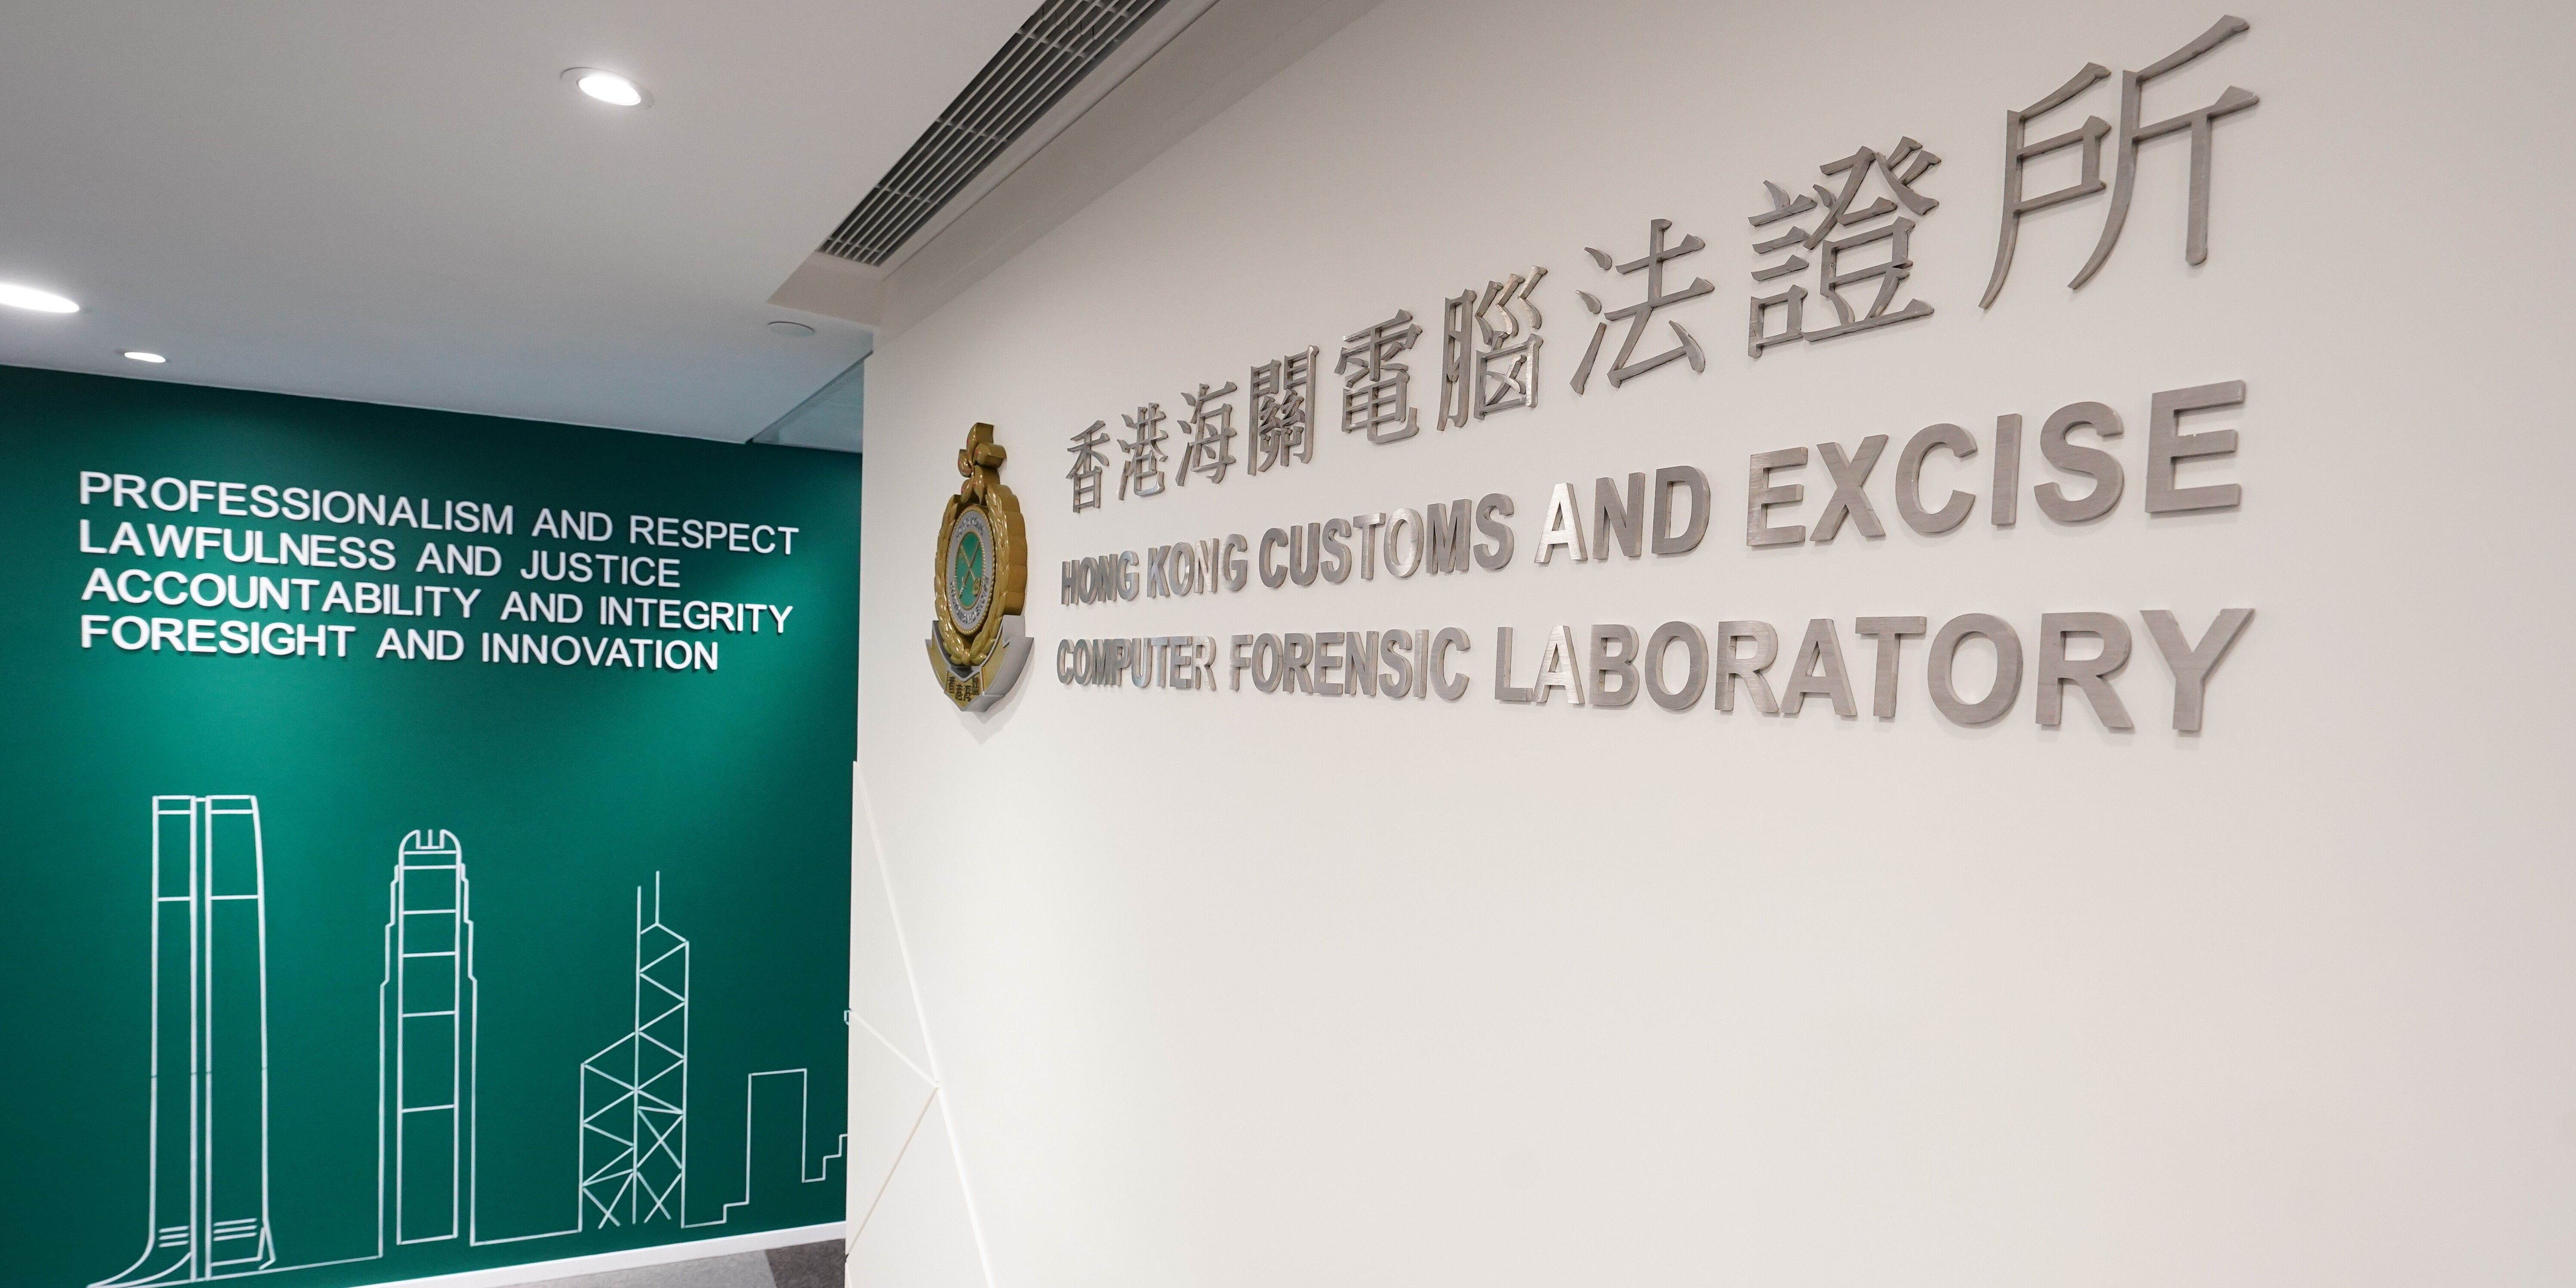 Completion of the expansion of Customs Computer Forensic Laboratory